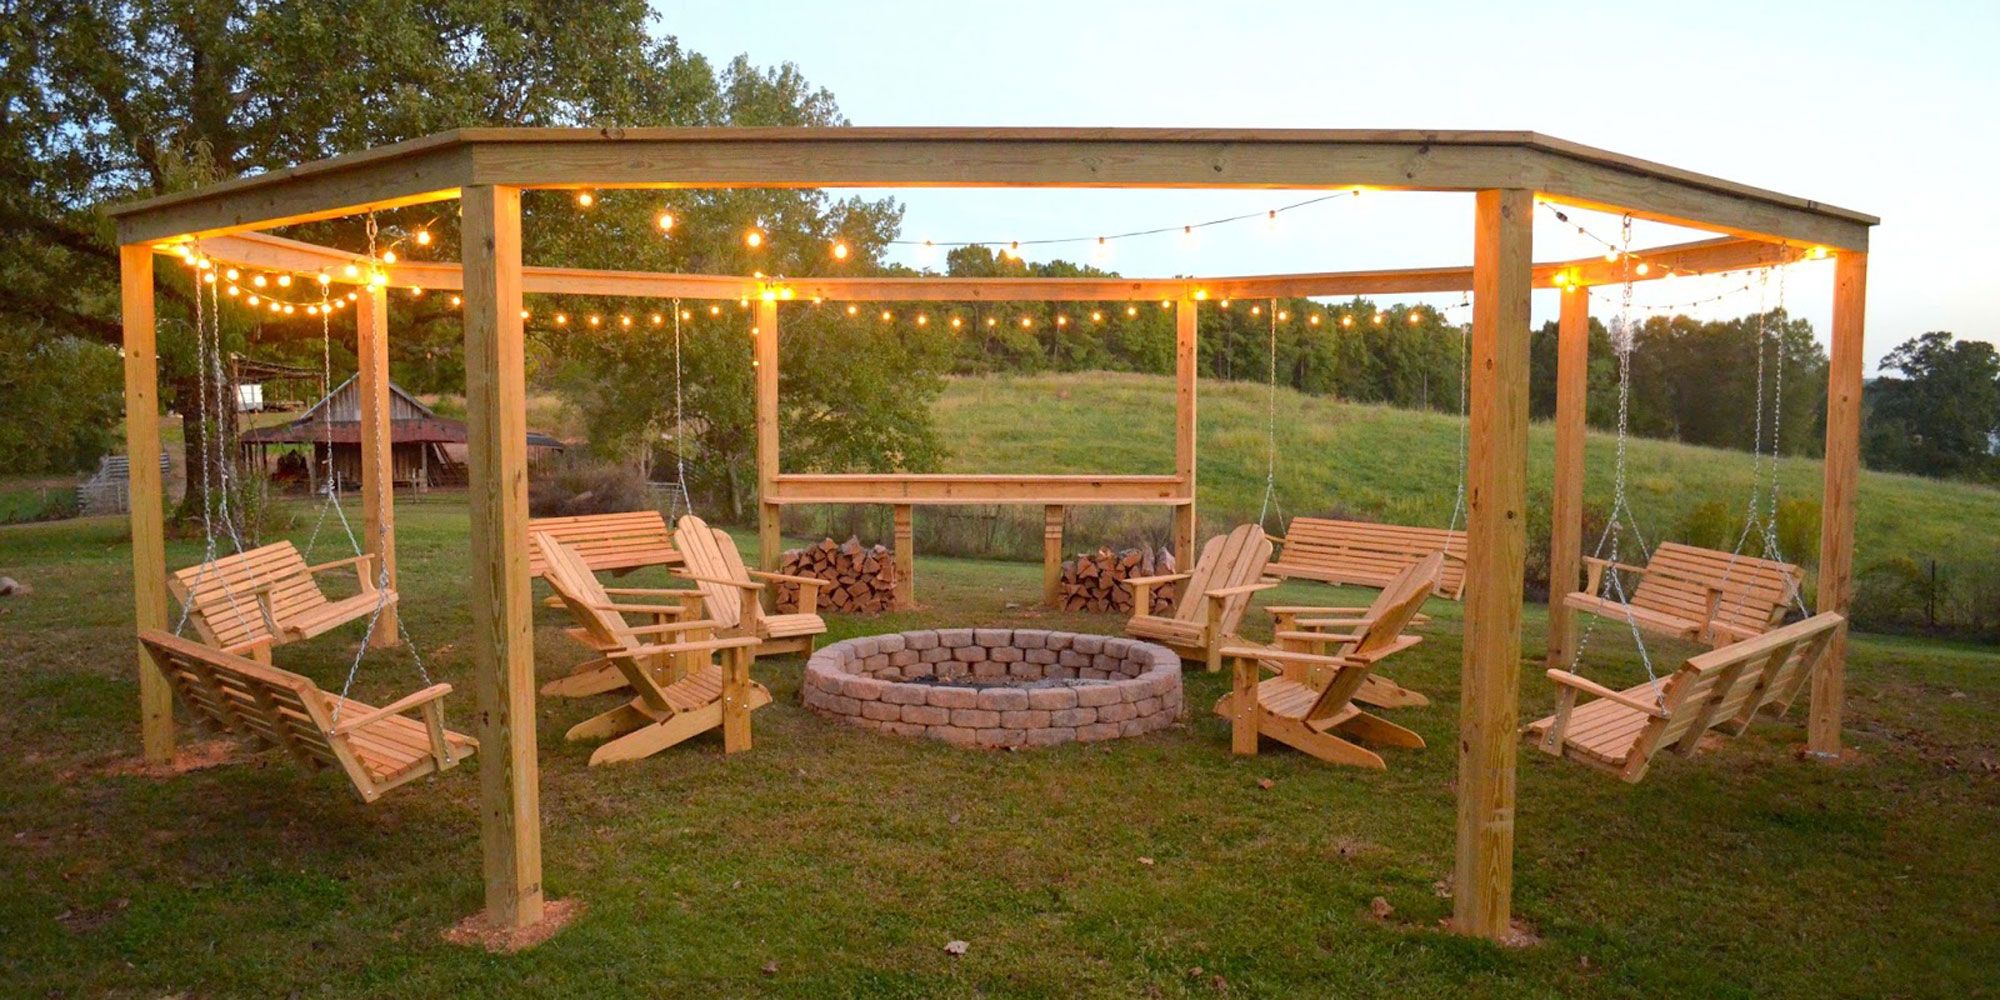 This Diy Backyard Pergola Is The, Wooden Gazebo With Fire Pit